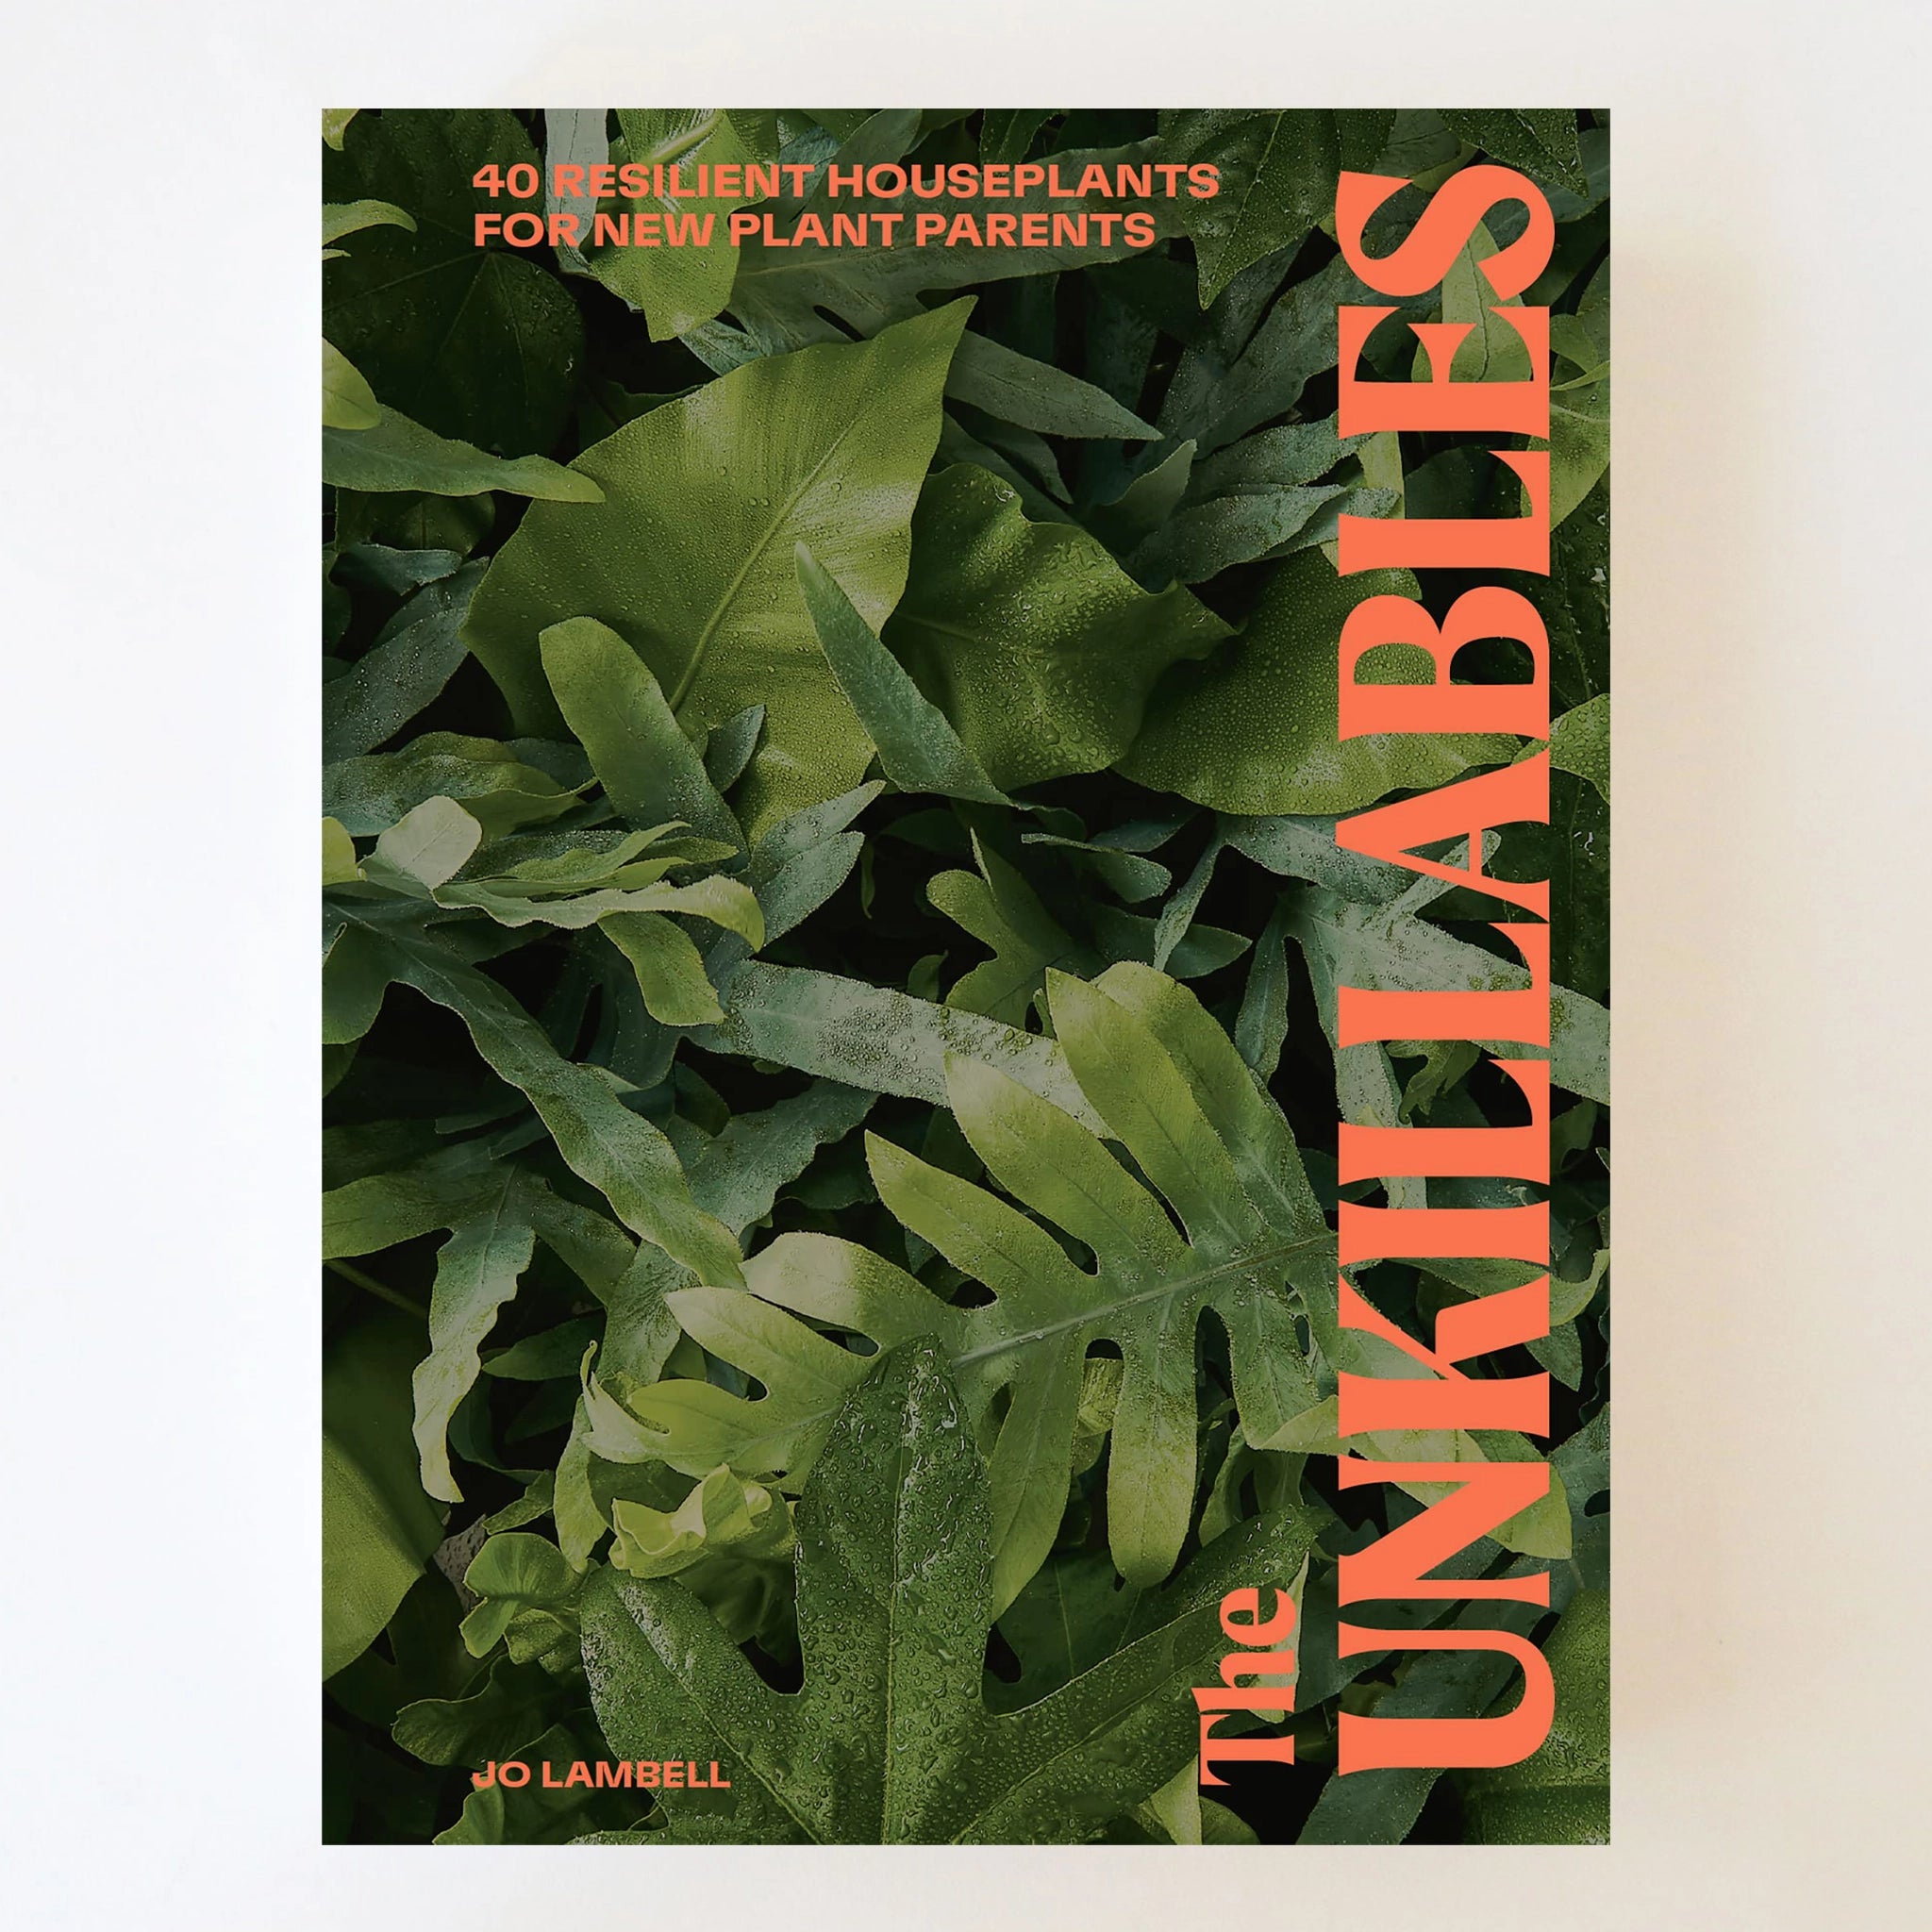 A book cover filled with a photograph of green leafy house plants and orange text on the side that reads "The Unkillables, 40 resilient houseplants for new plant parents".